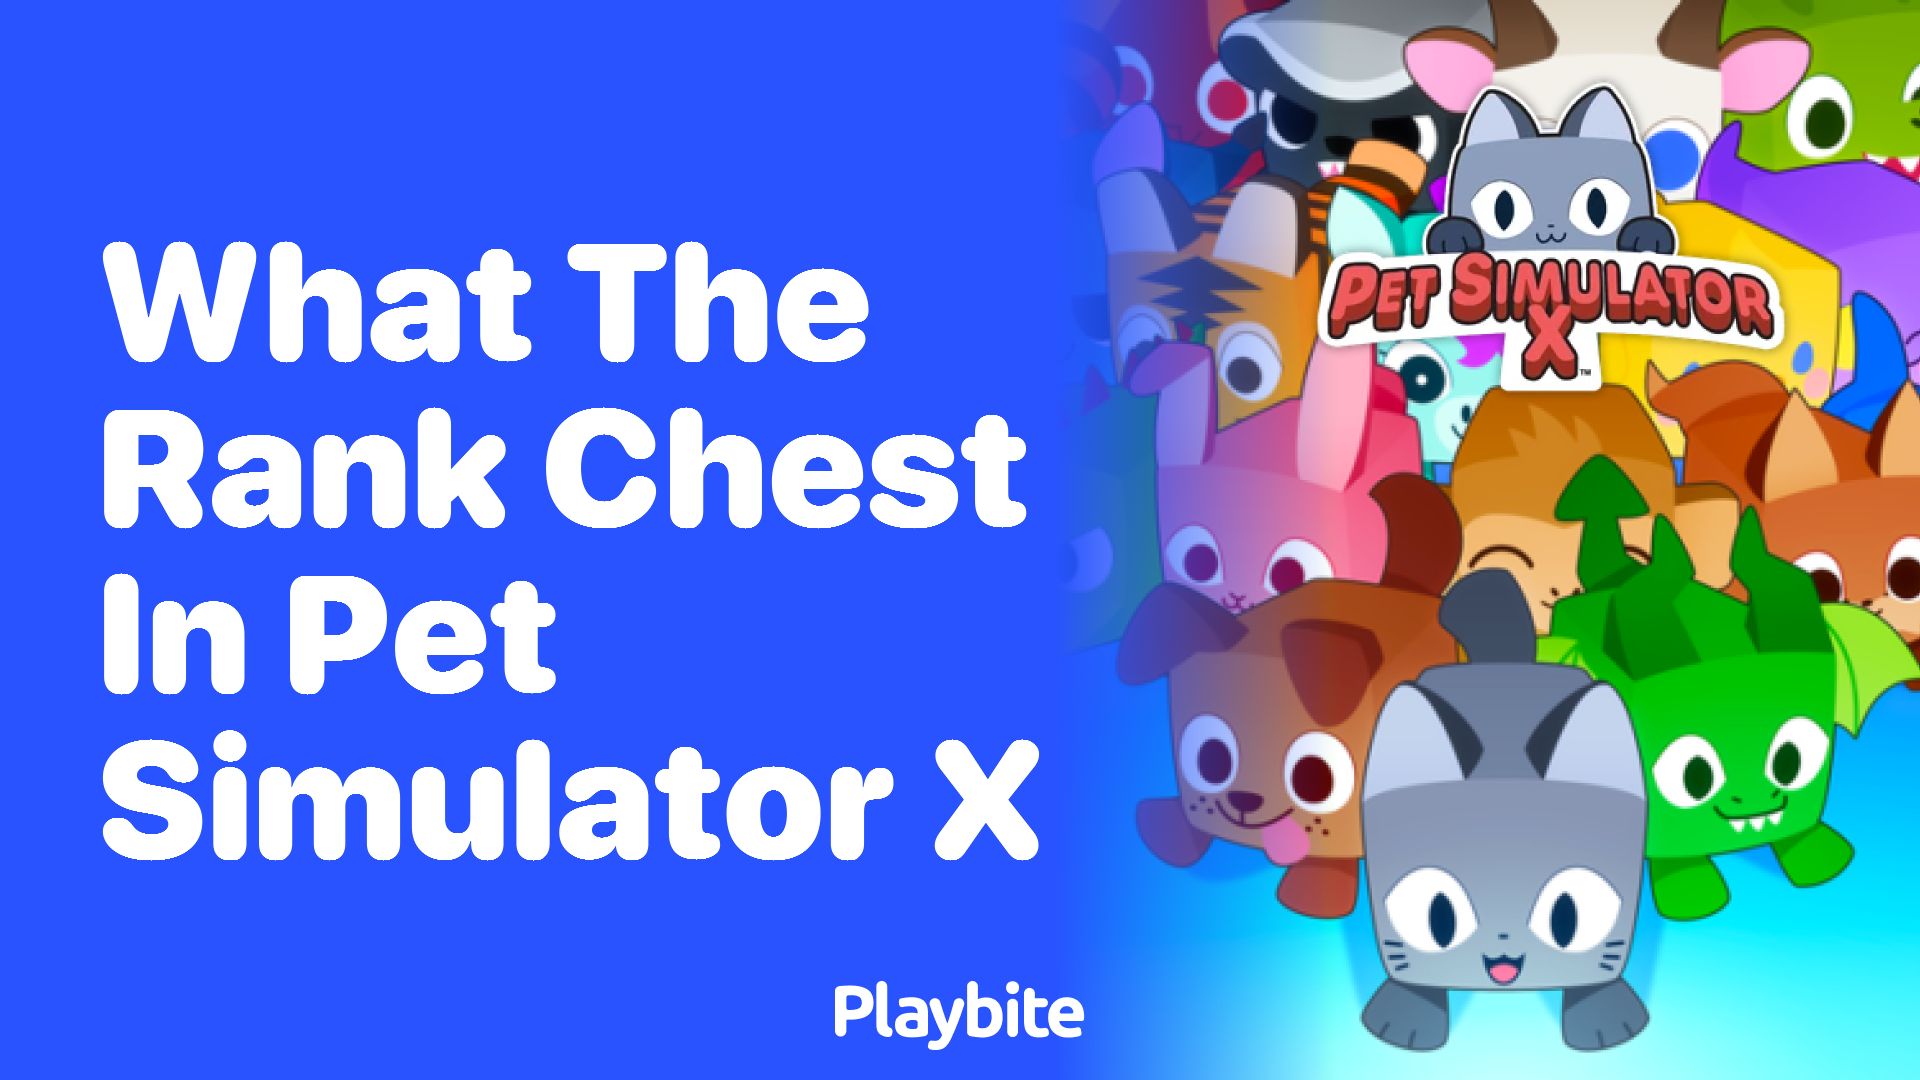 What is the Rank Chest in Pet Simulator X?